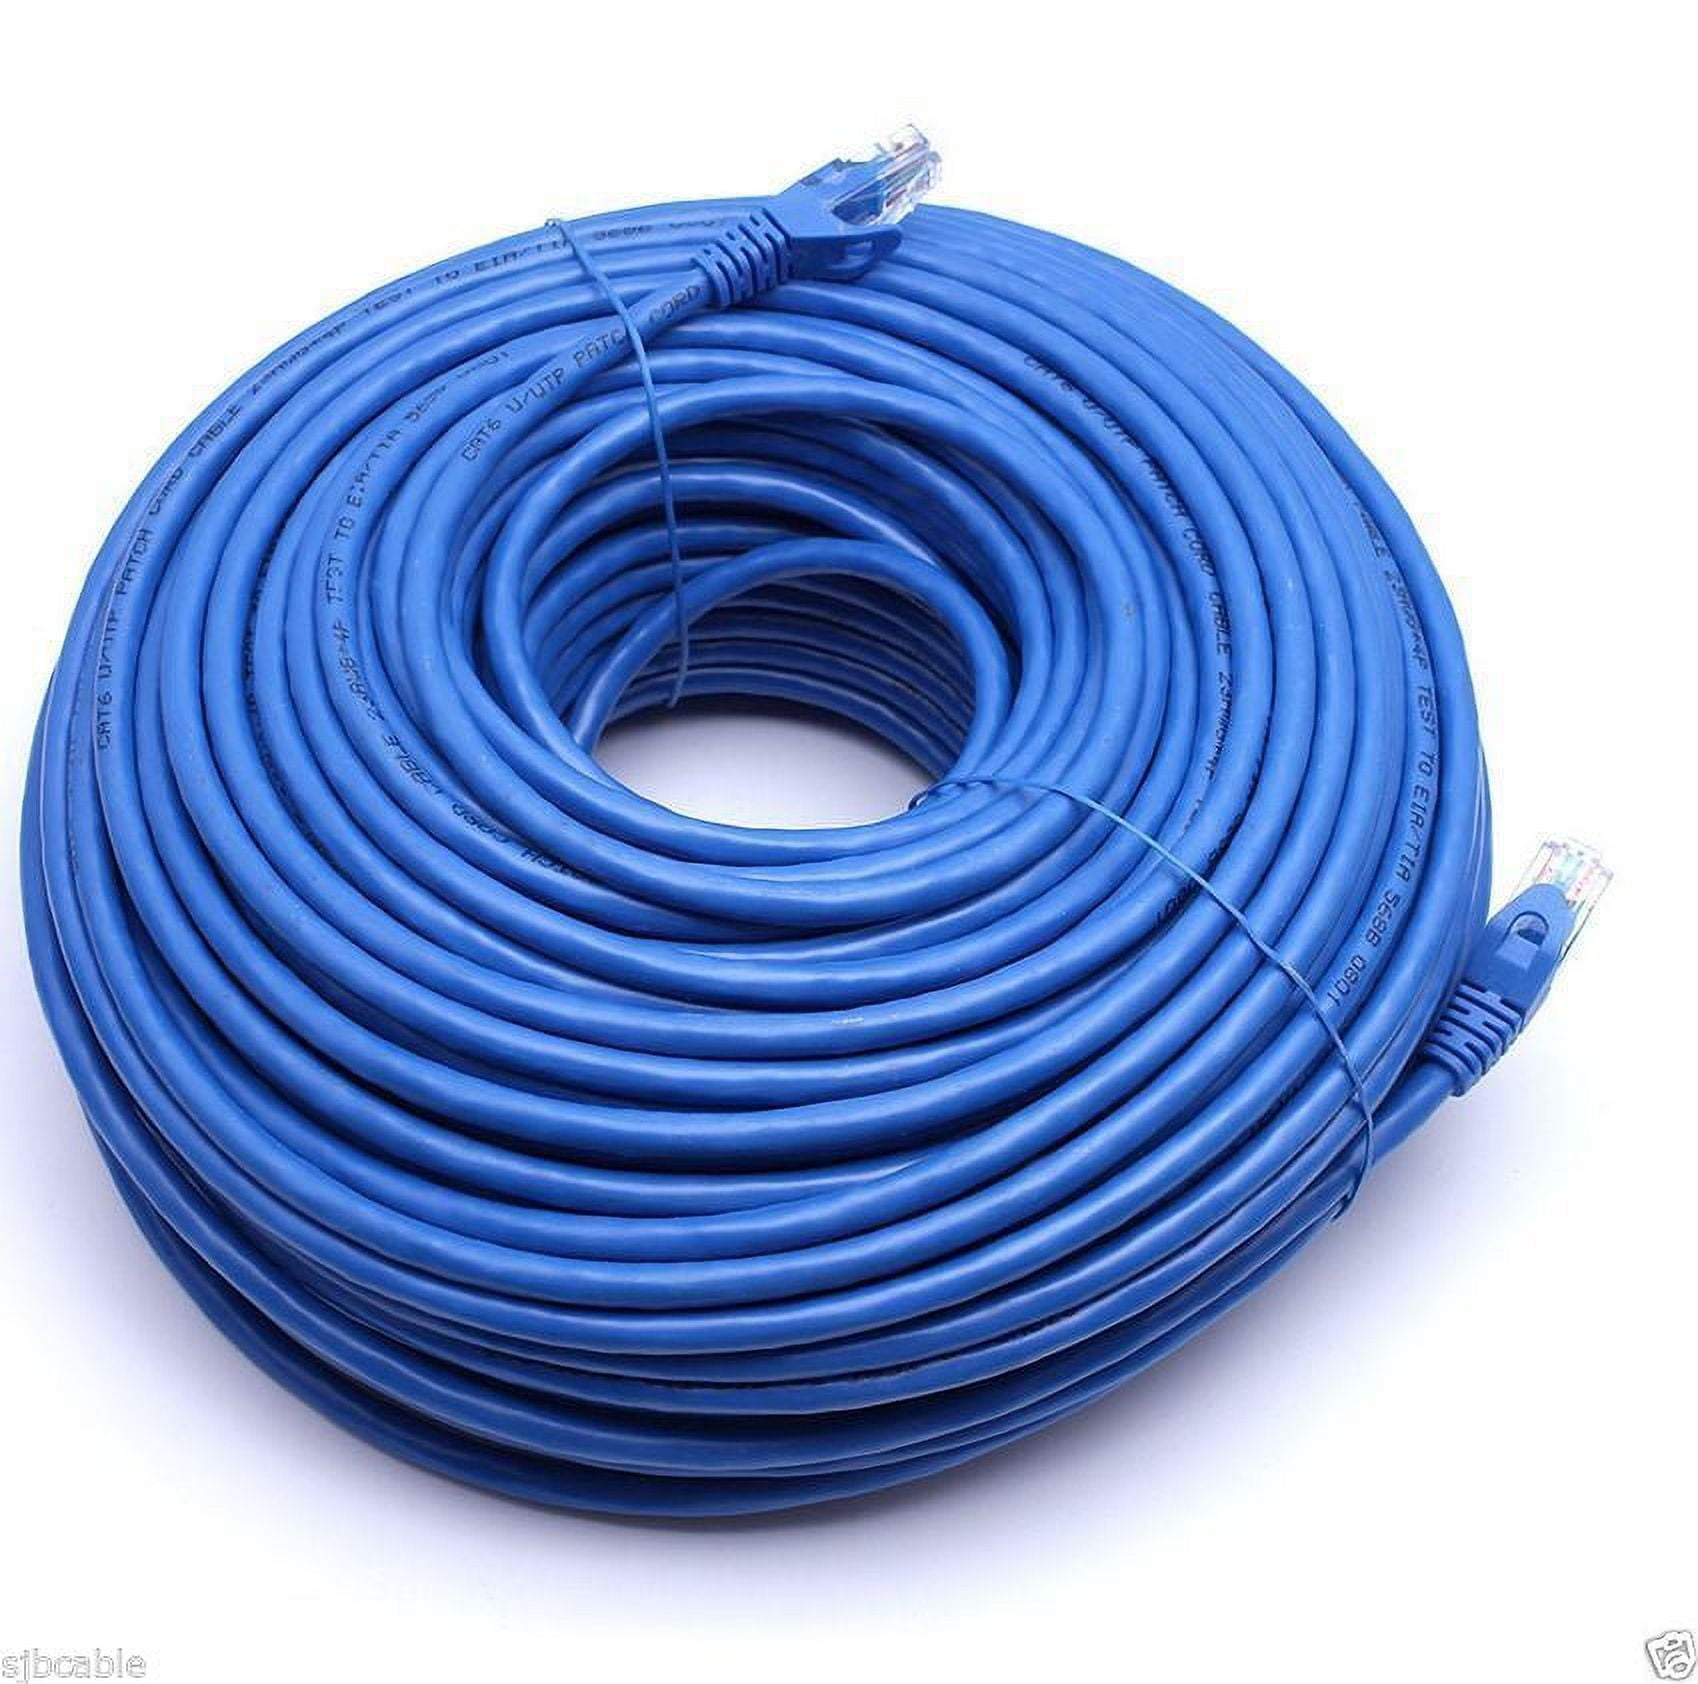 Cablevantage RJ45 Cat6 200 Feet Ethernet LAN Network Cable for PS Xbox PC  Internet Router Blue 